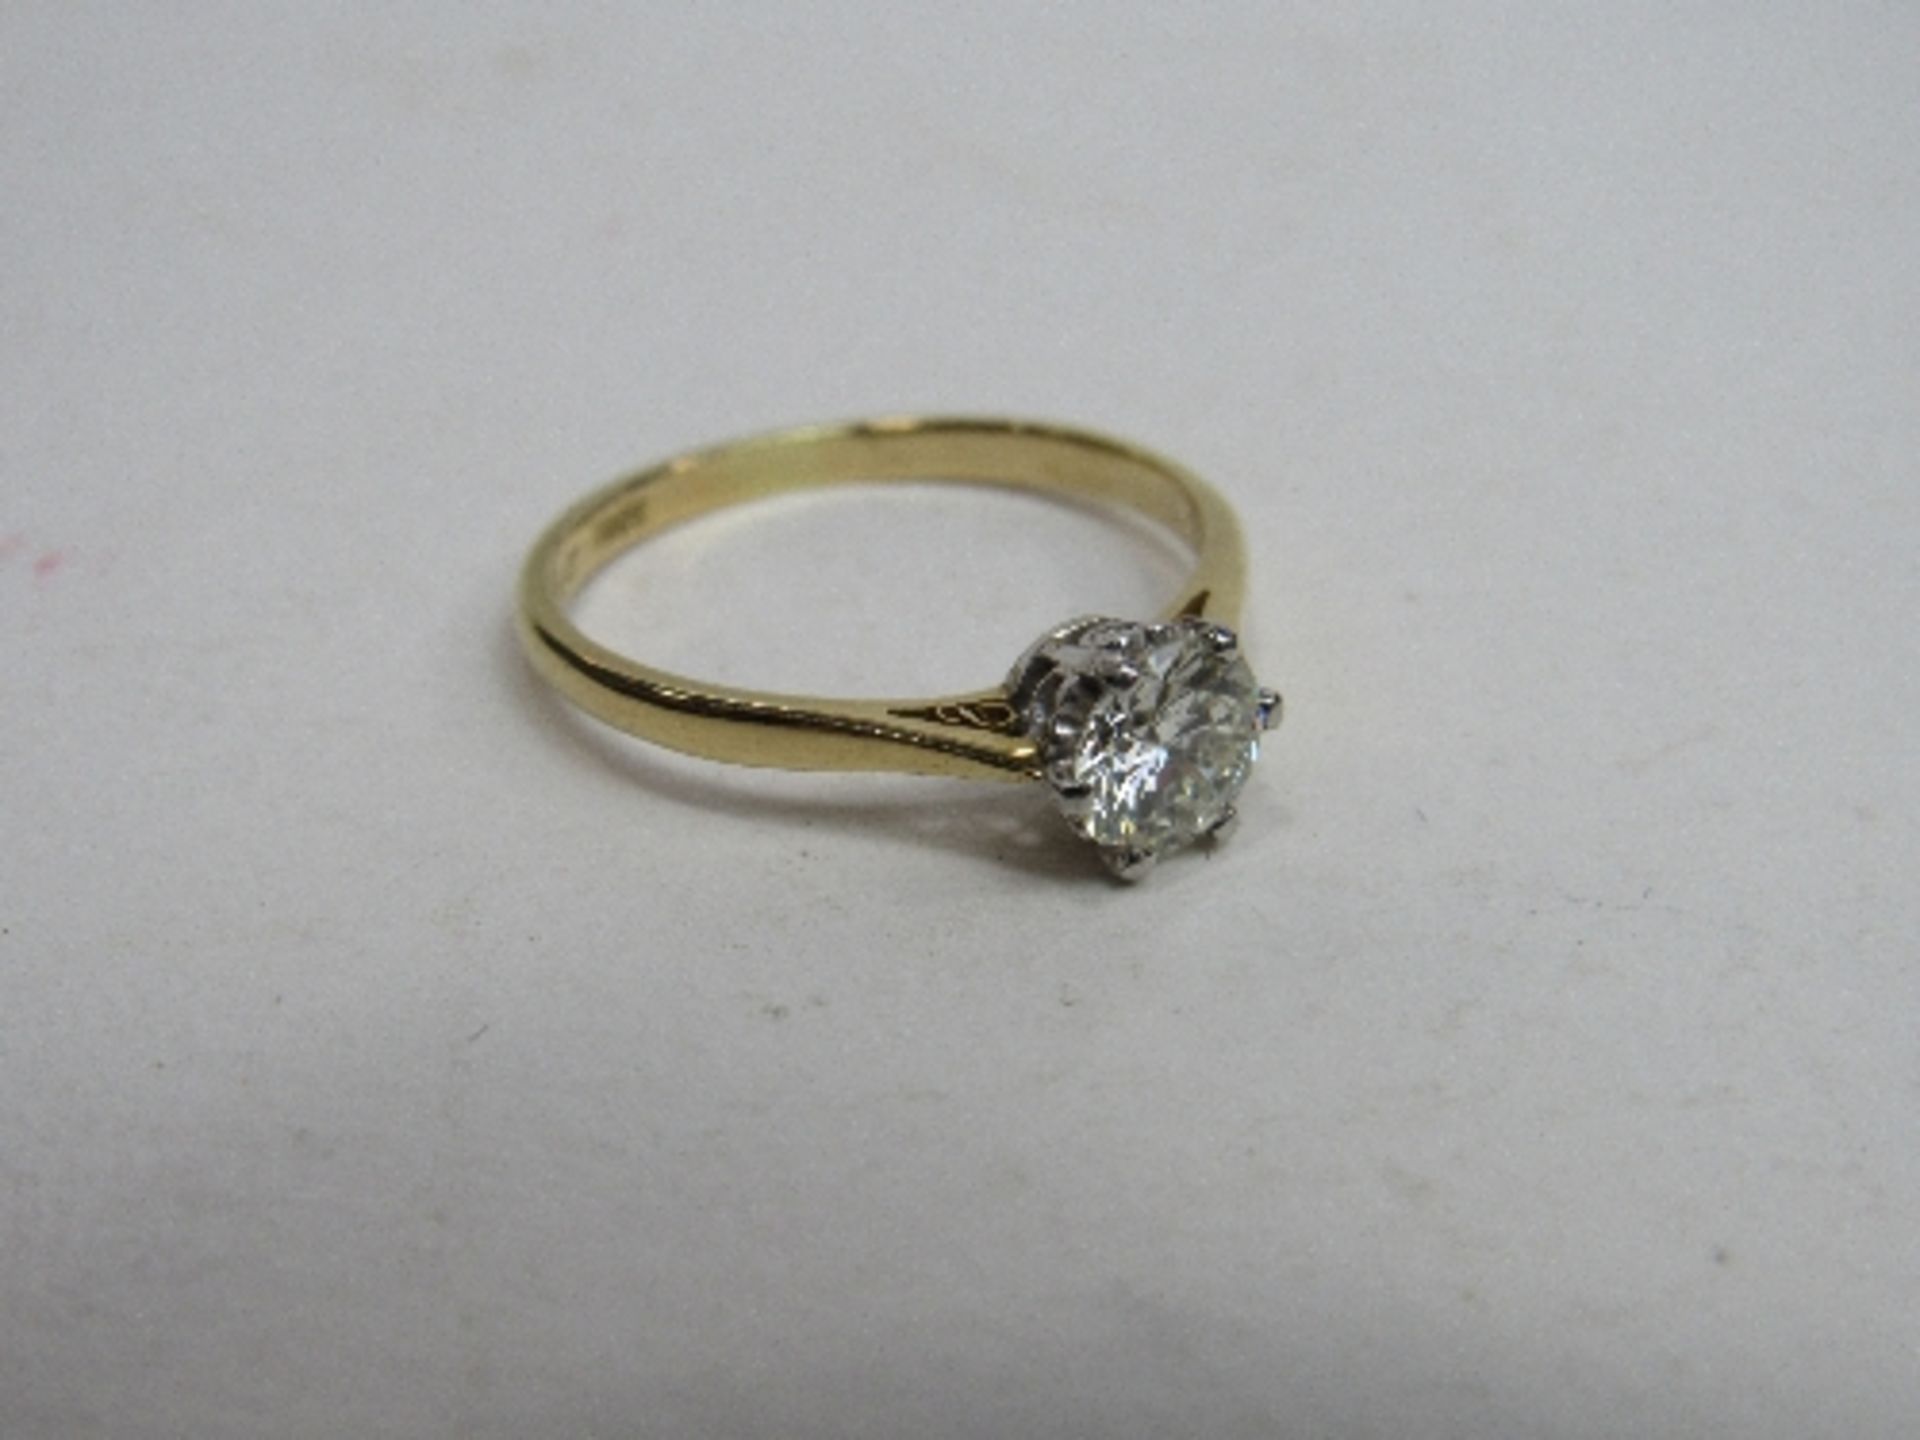 18ct gold diamond solitaire ring, approx 3/4 carat diamond, size S1/2, wt 3.2gms. Price guide £850-